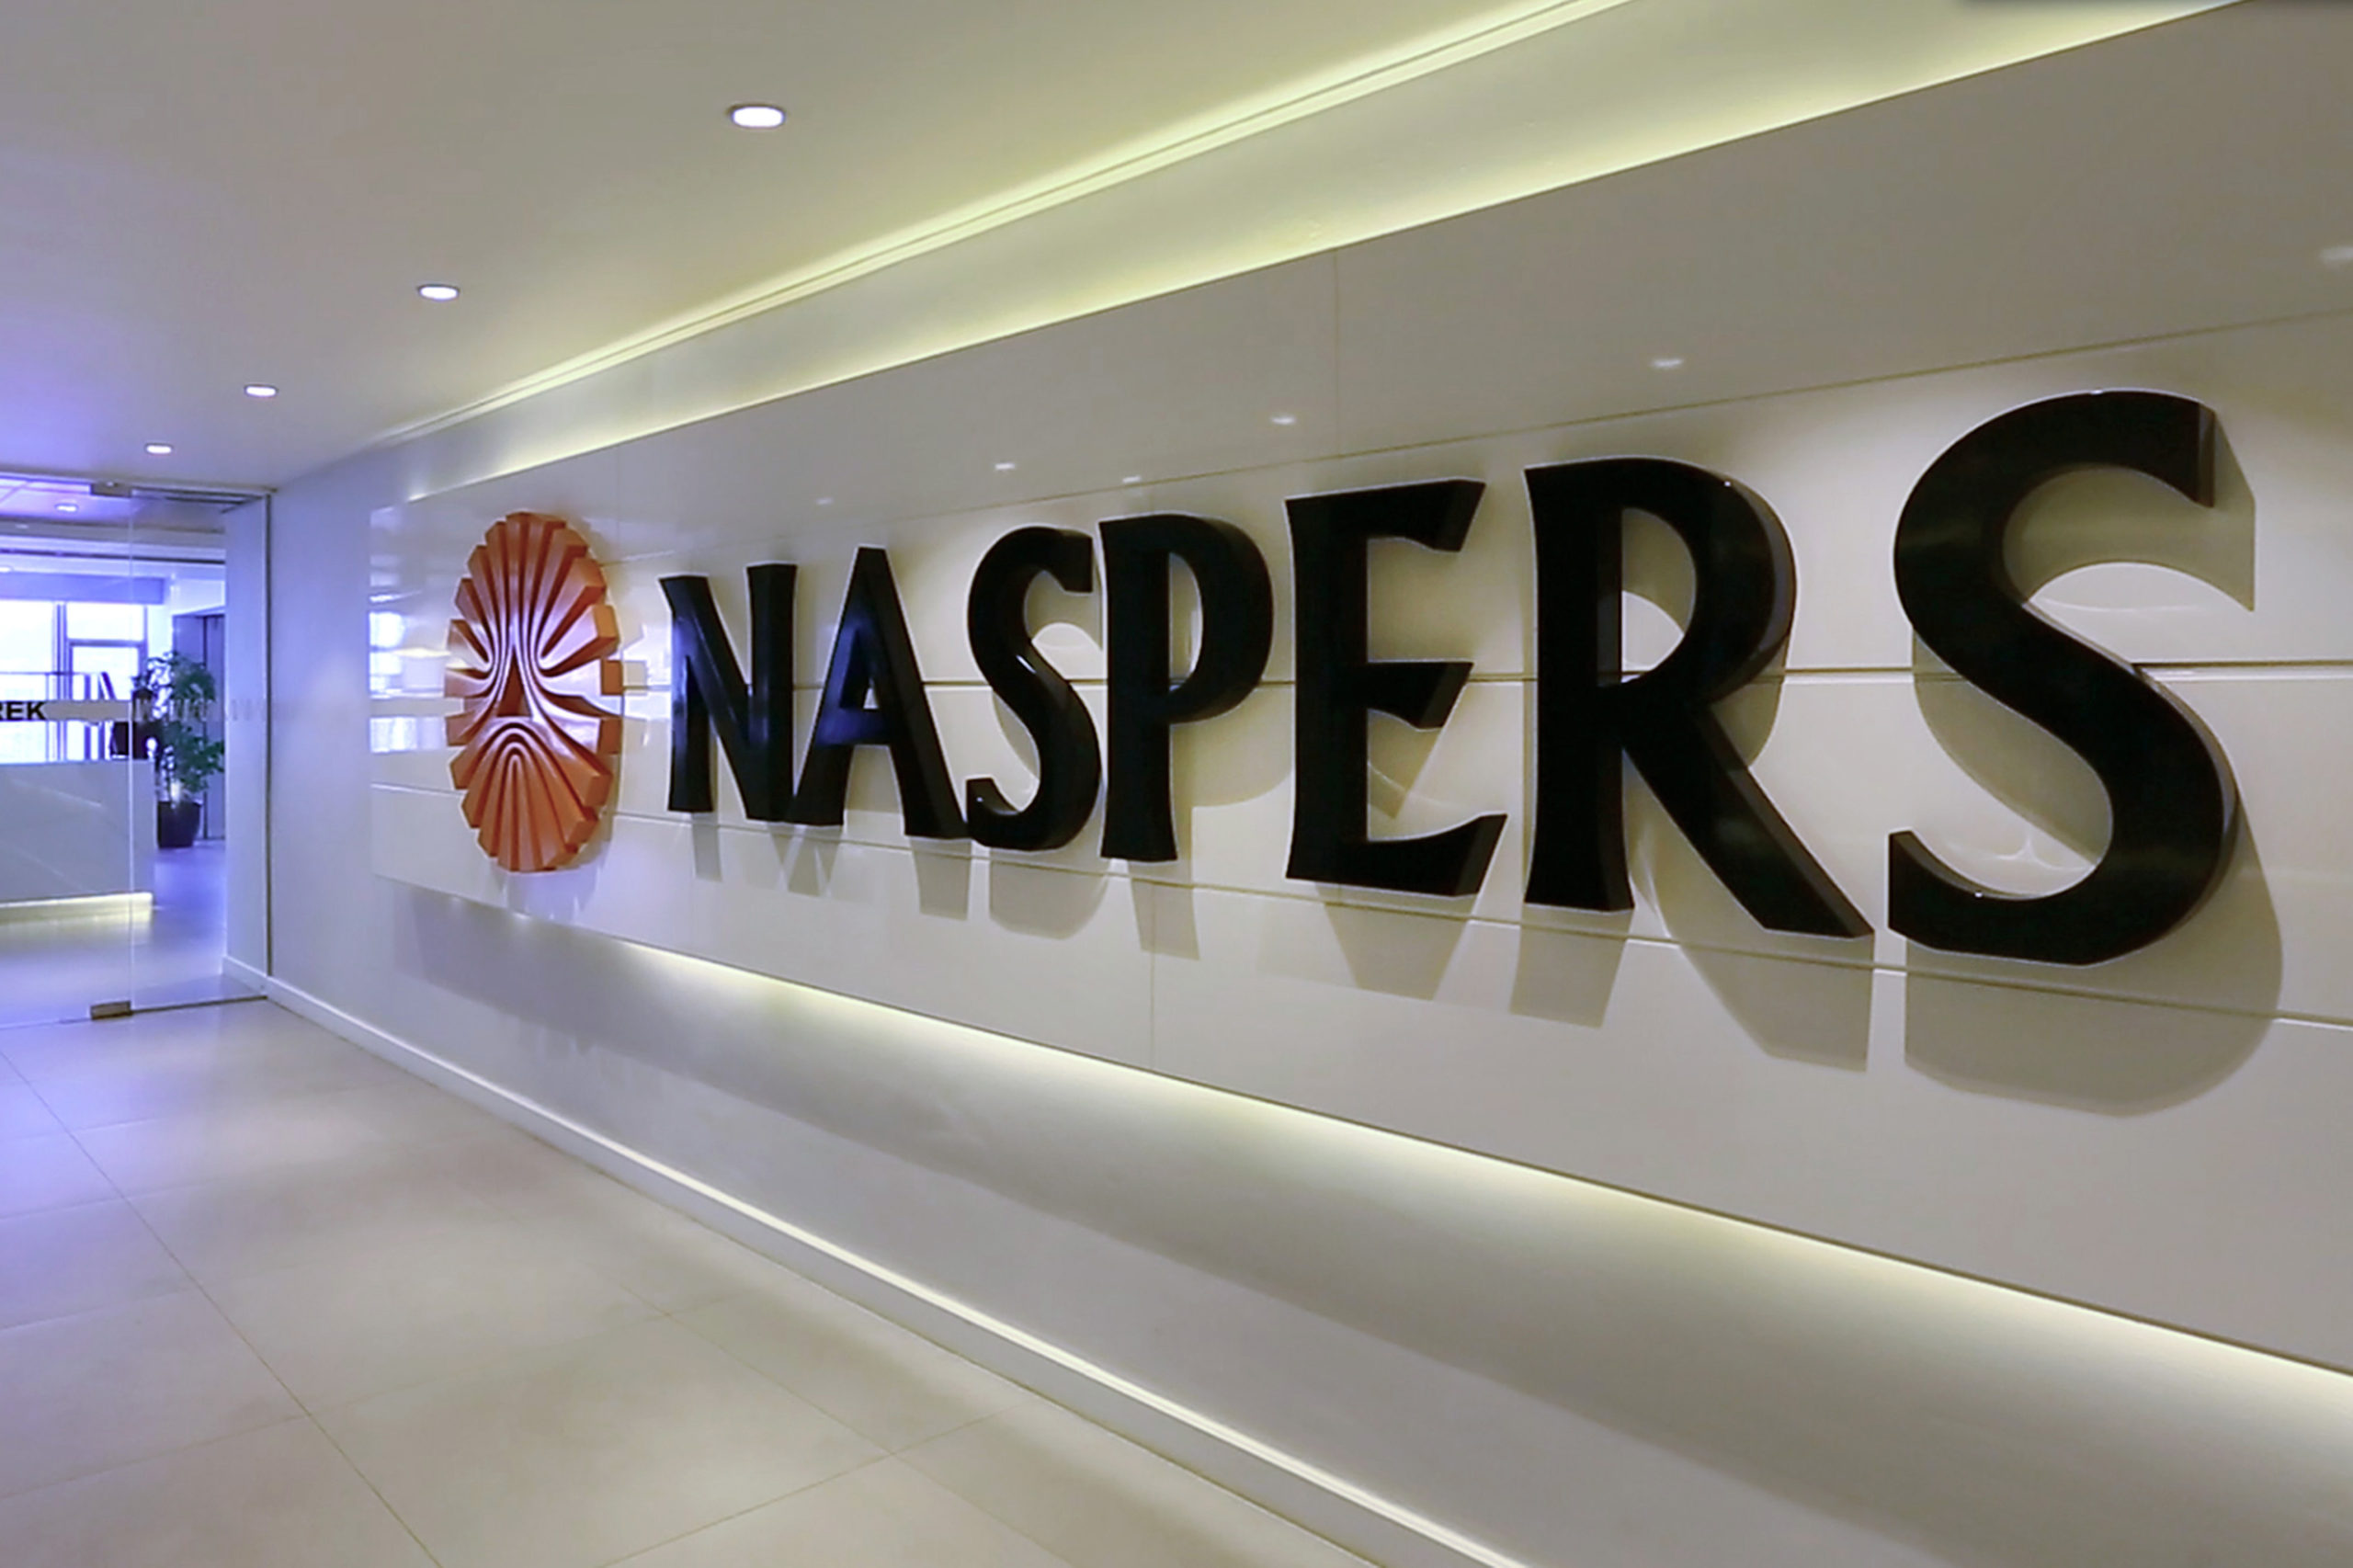 Naspers anticipating earnings to take a success in as we speak’s monetary outcomes